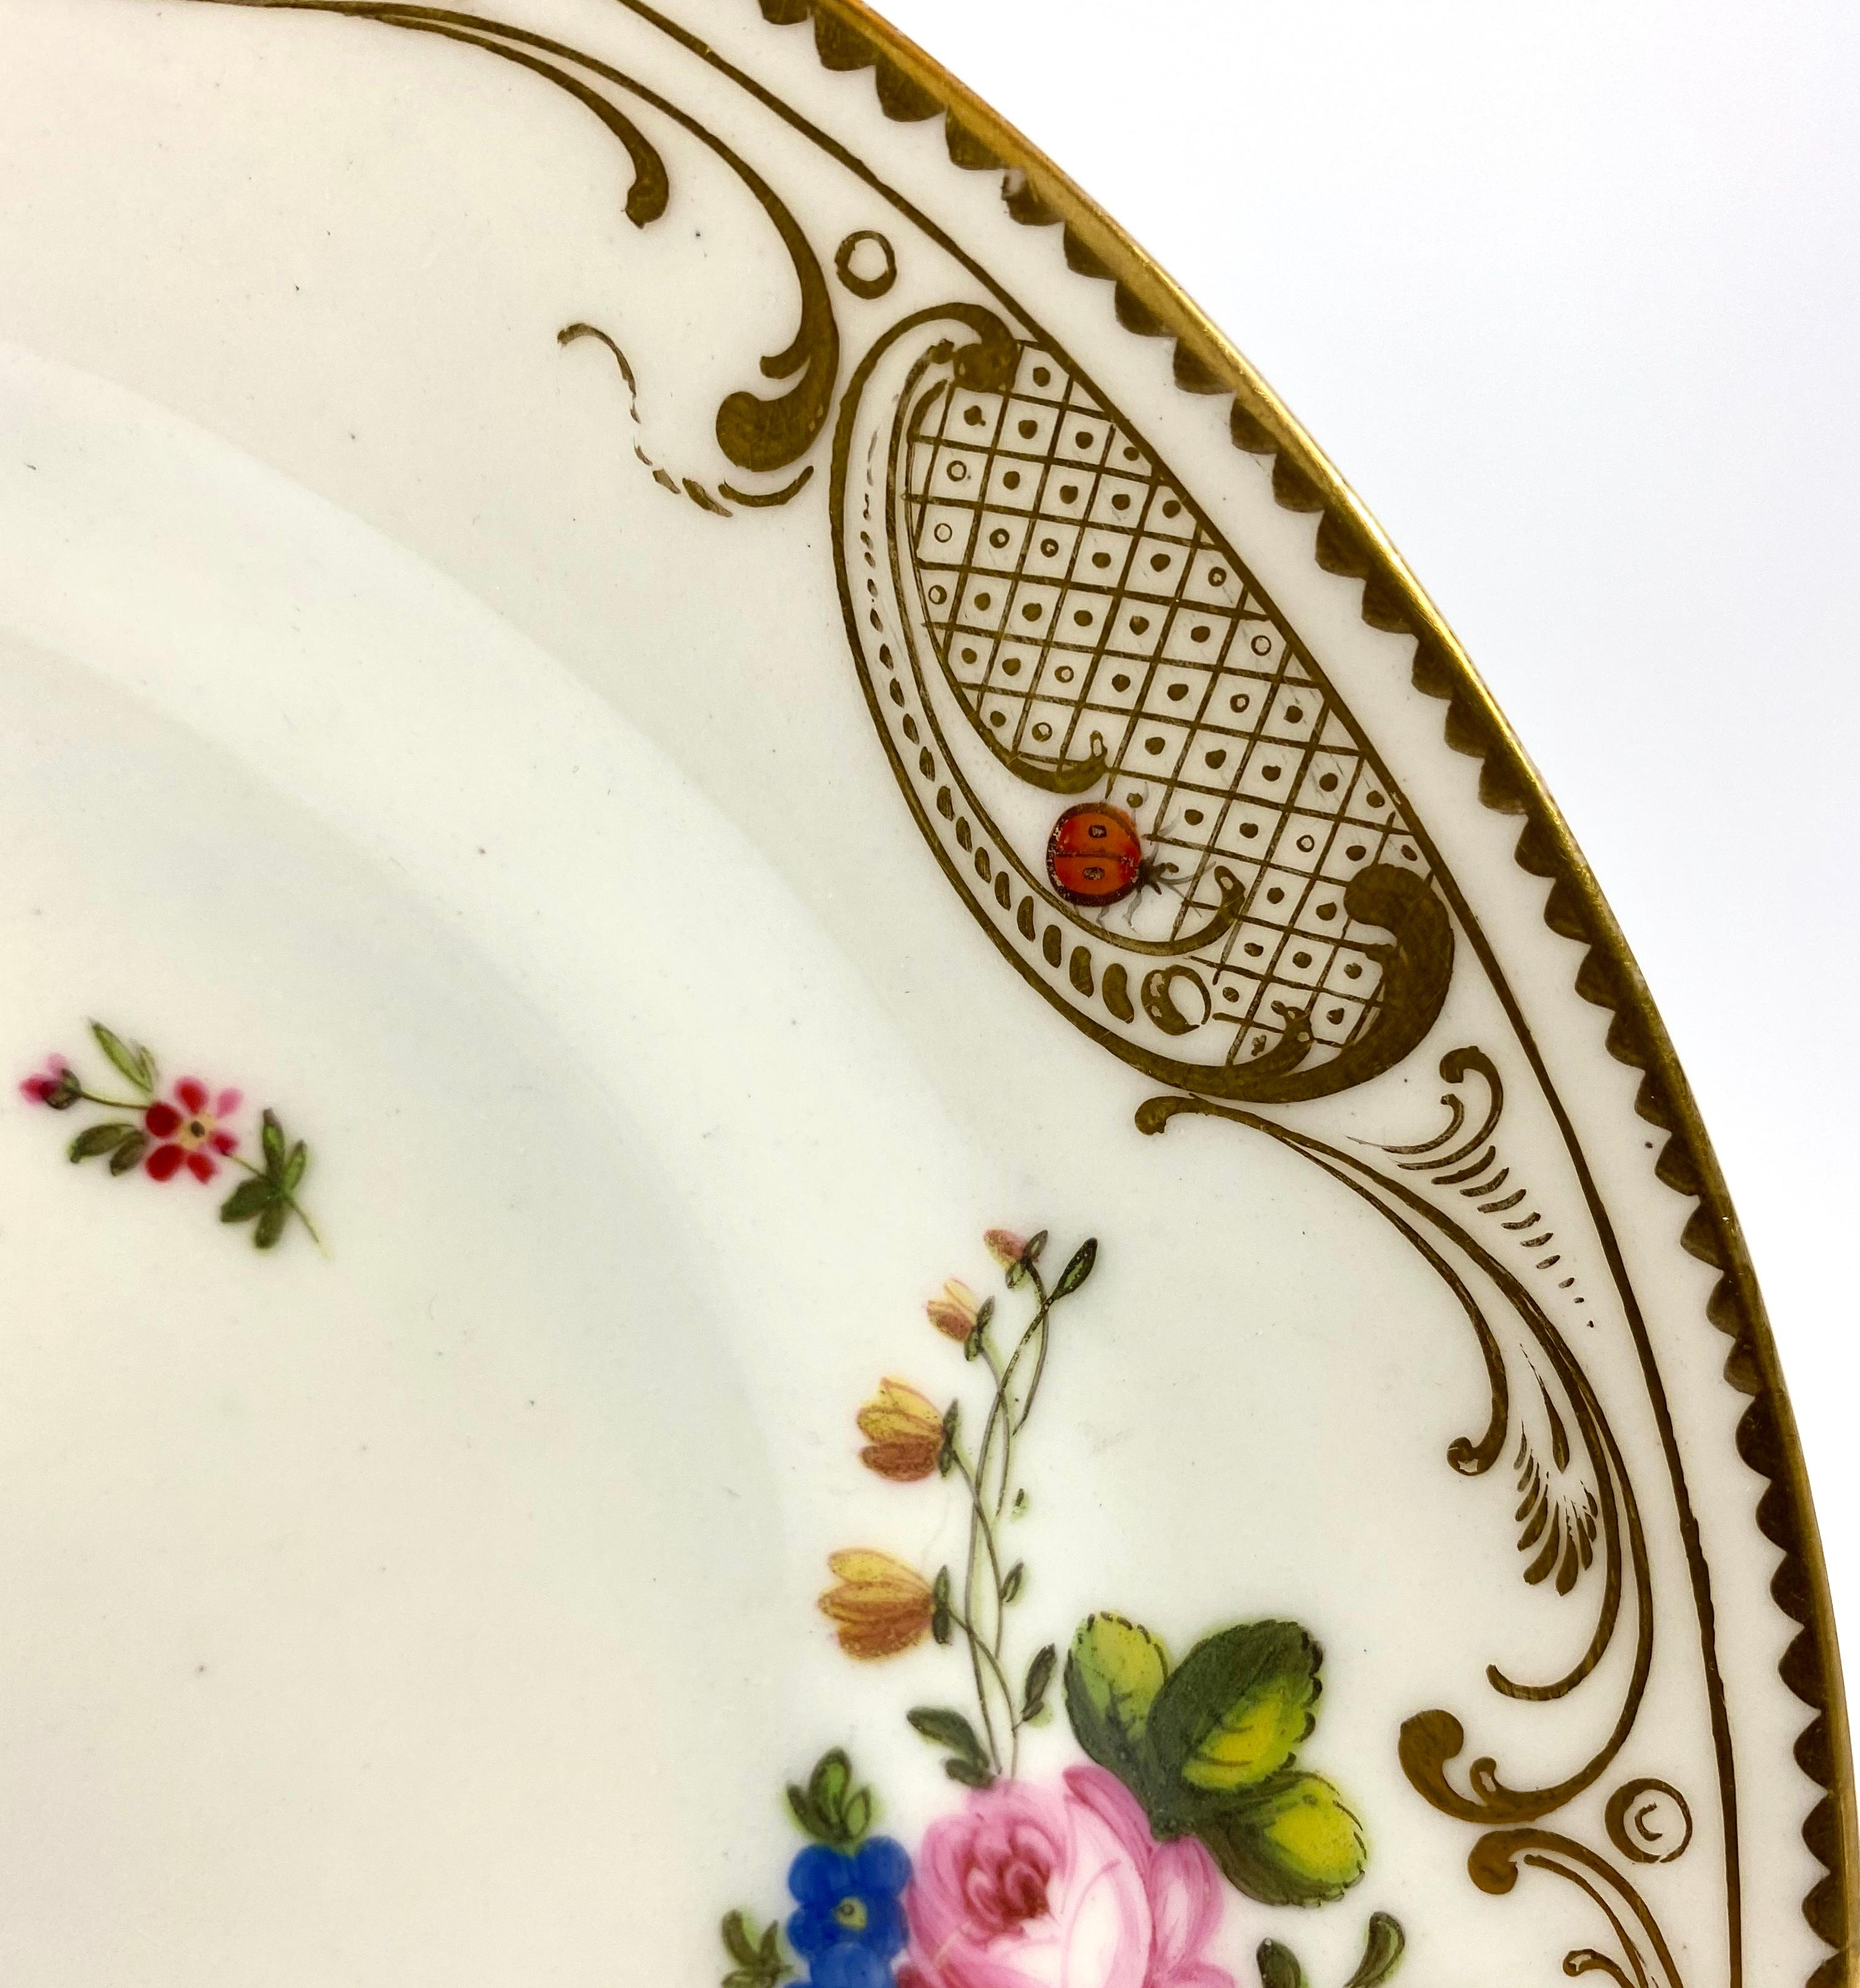 Welsh Swansea Porcelain Plate, Flowers and Insects, circa 1815